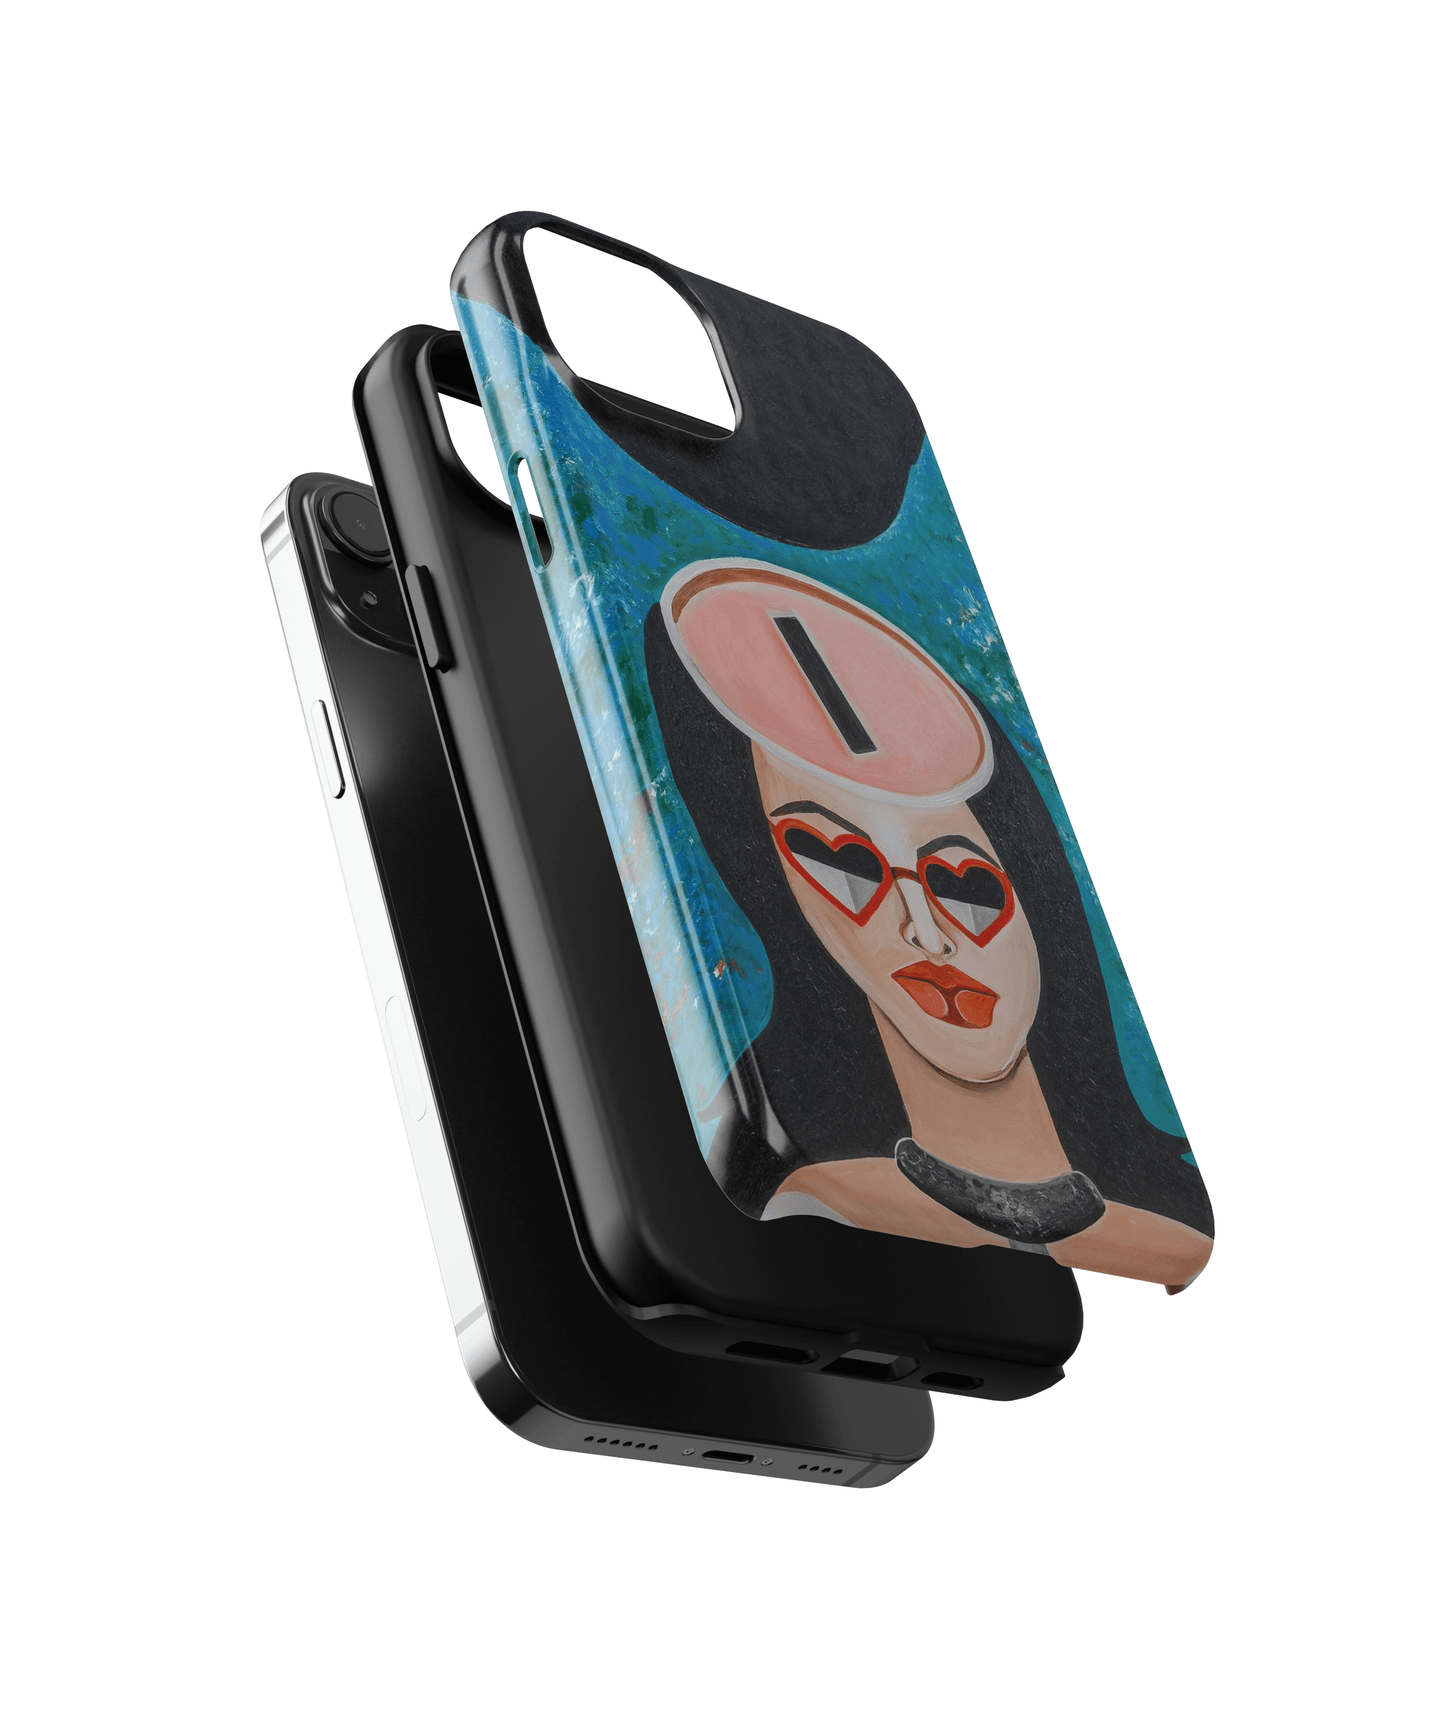 Materialiste - Huawei Mate 20 Pro phone case